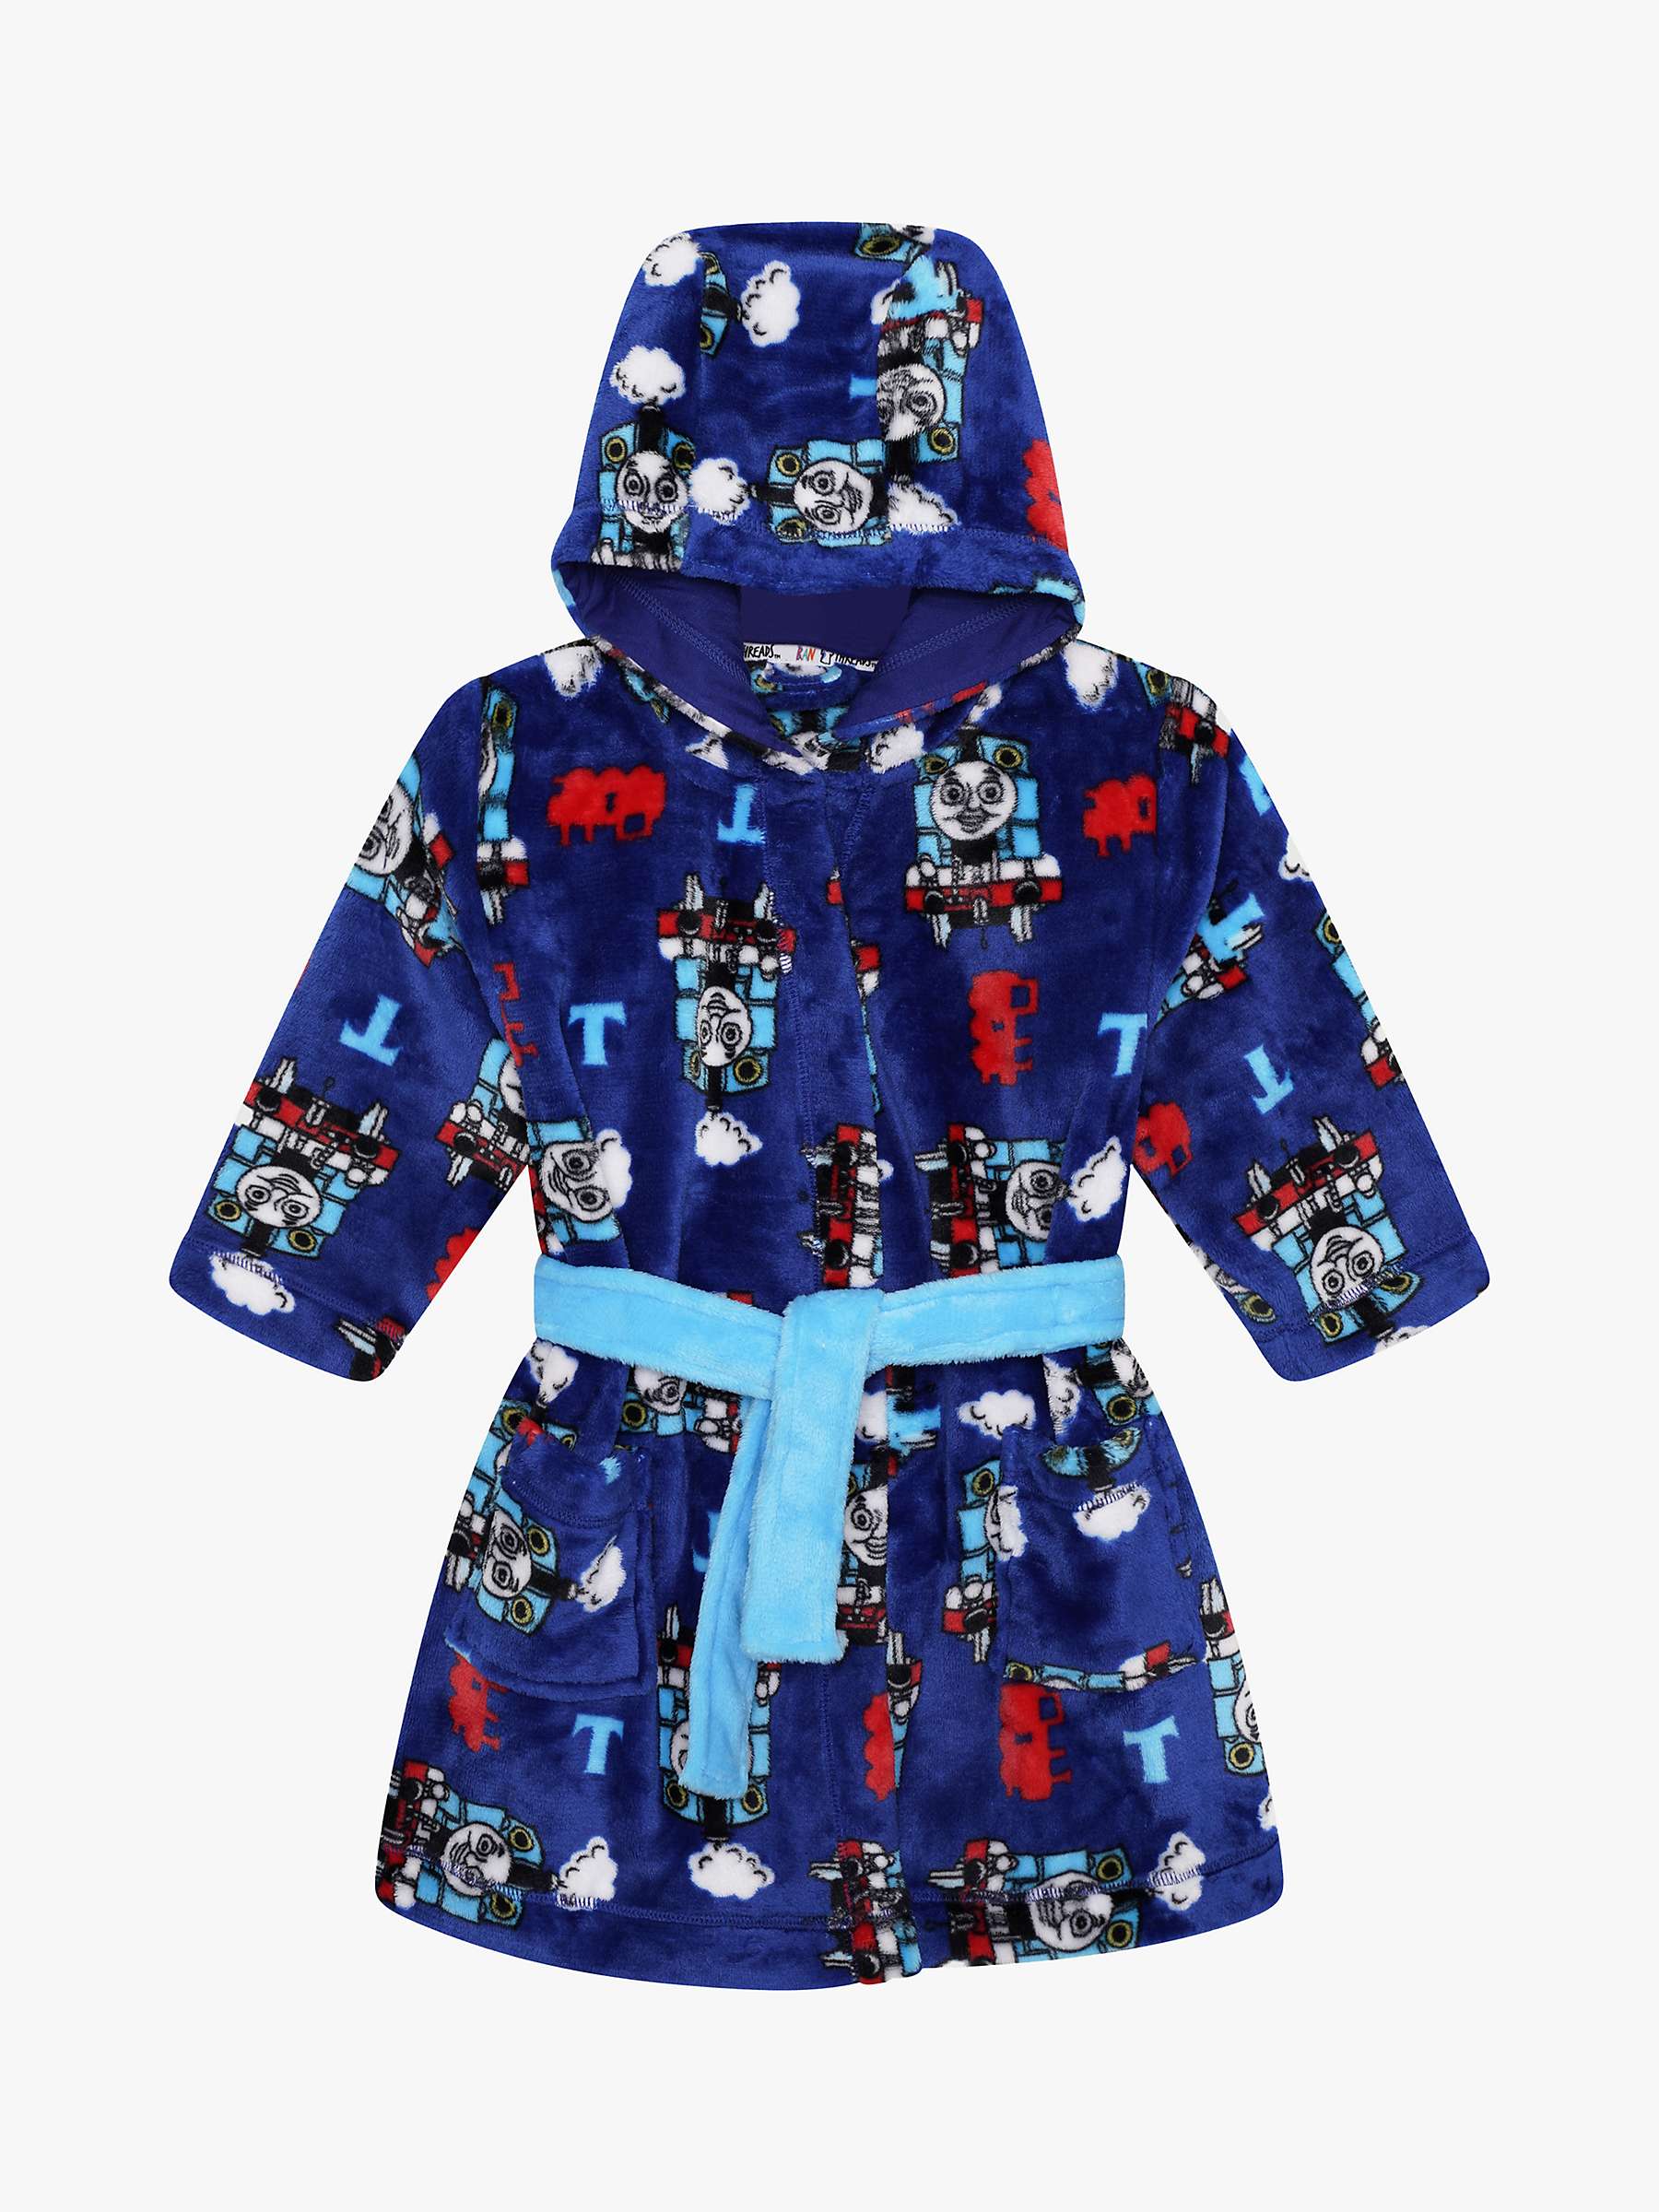 Buy Brand Threads Kids' Thomas the Tank Engine Dressing Gown, Navy Online at johnlewis.com